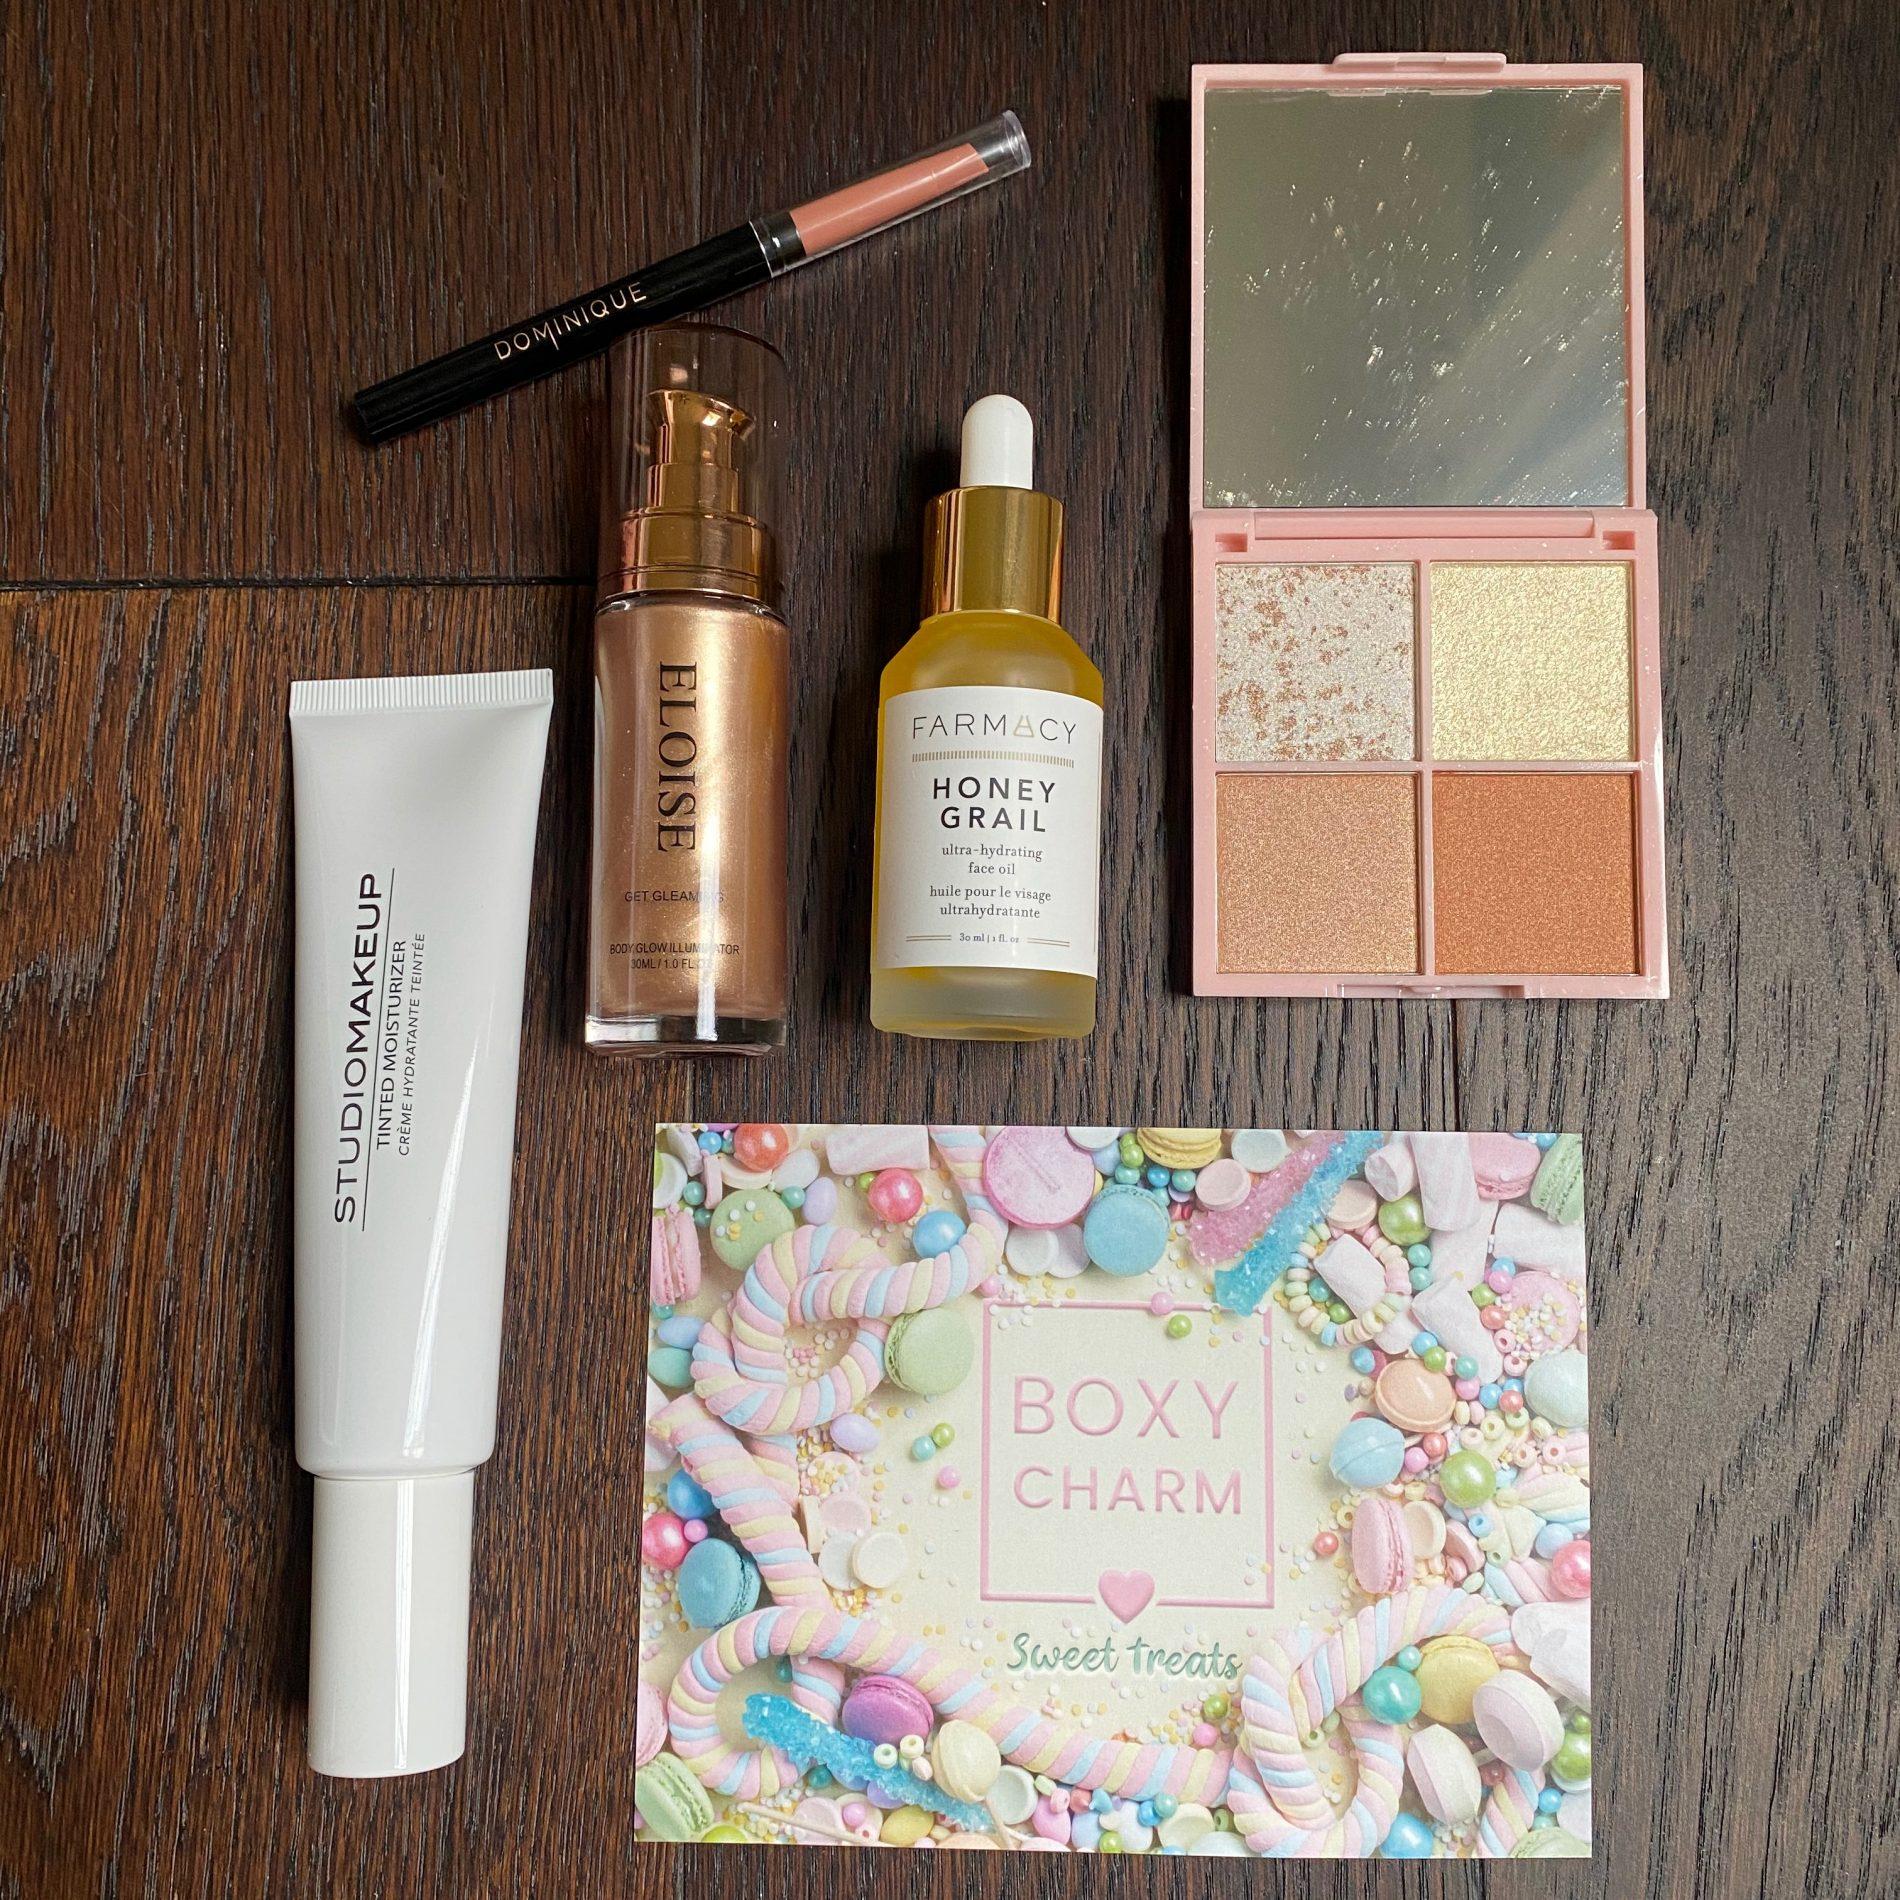 BOXYCHARM April 2021 Subscription Box Review + Coupon Code